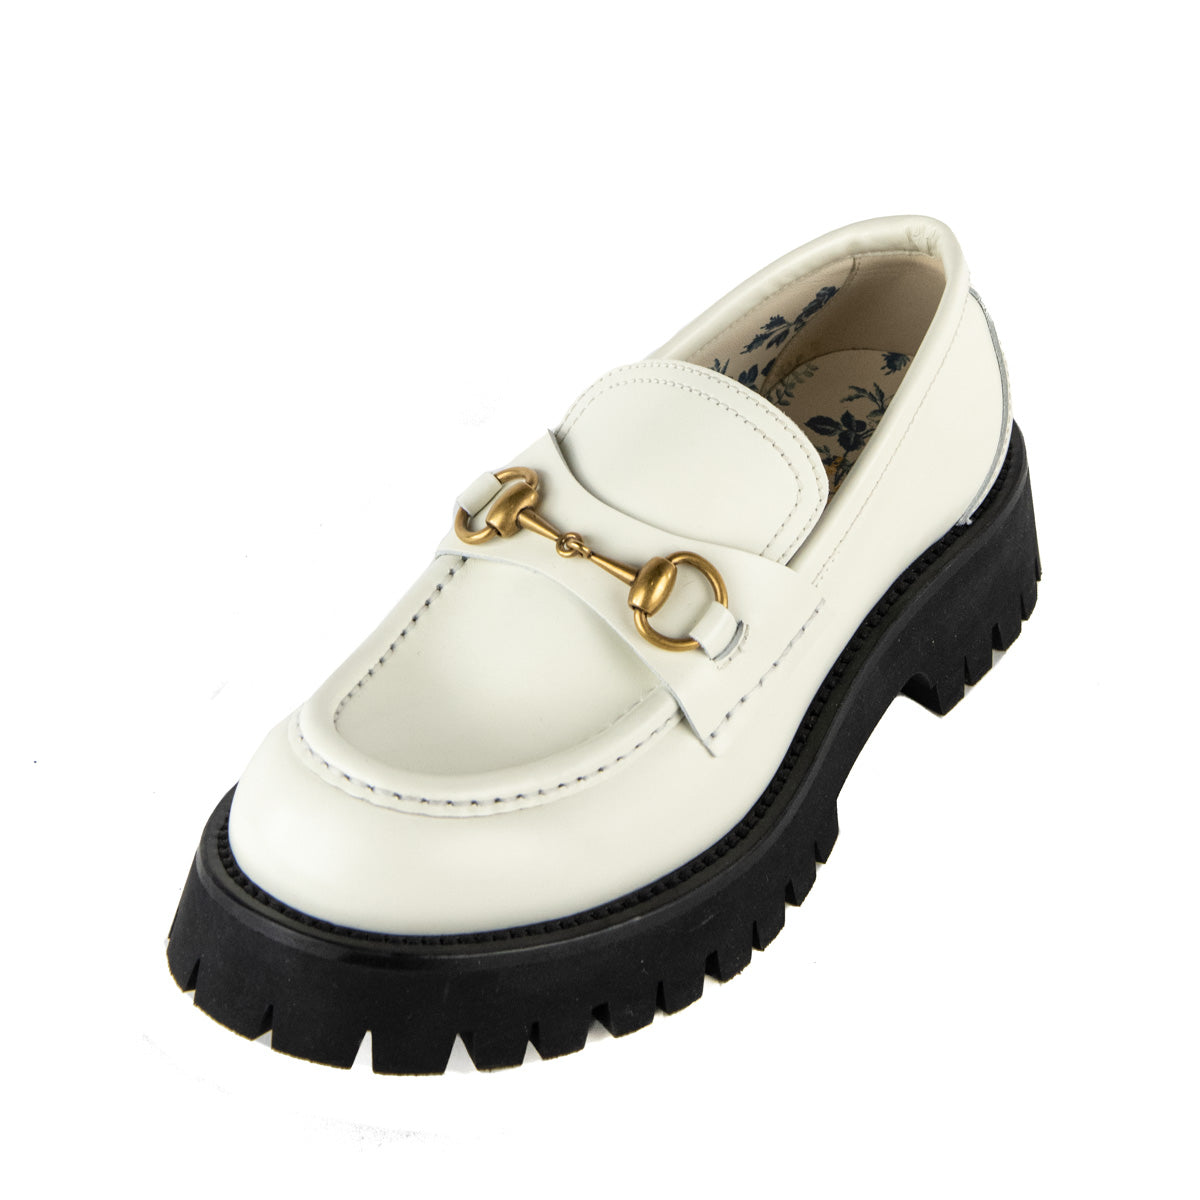 Gucci White Leather Lug Sole Horsebit Loafer Size US 8 | EU 38 - Love that Bag etc - Preowned Authentic Designer Handbags & Preloved Fashions